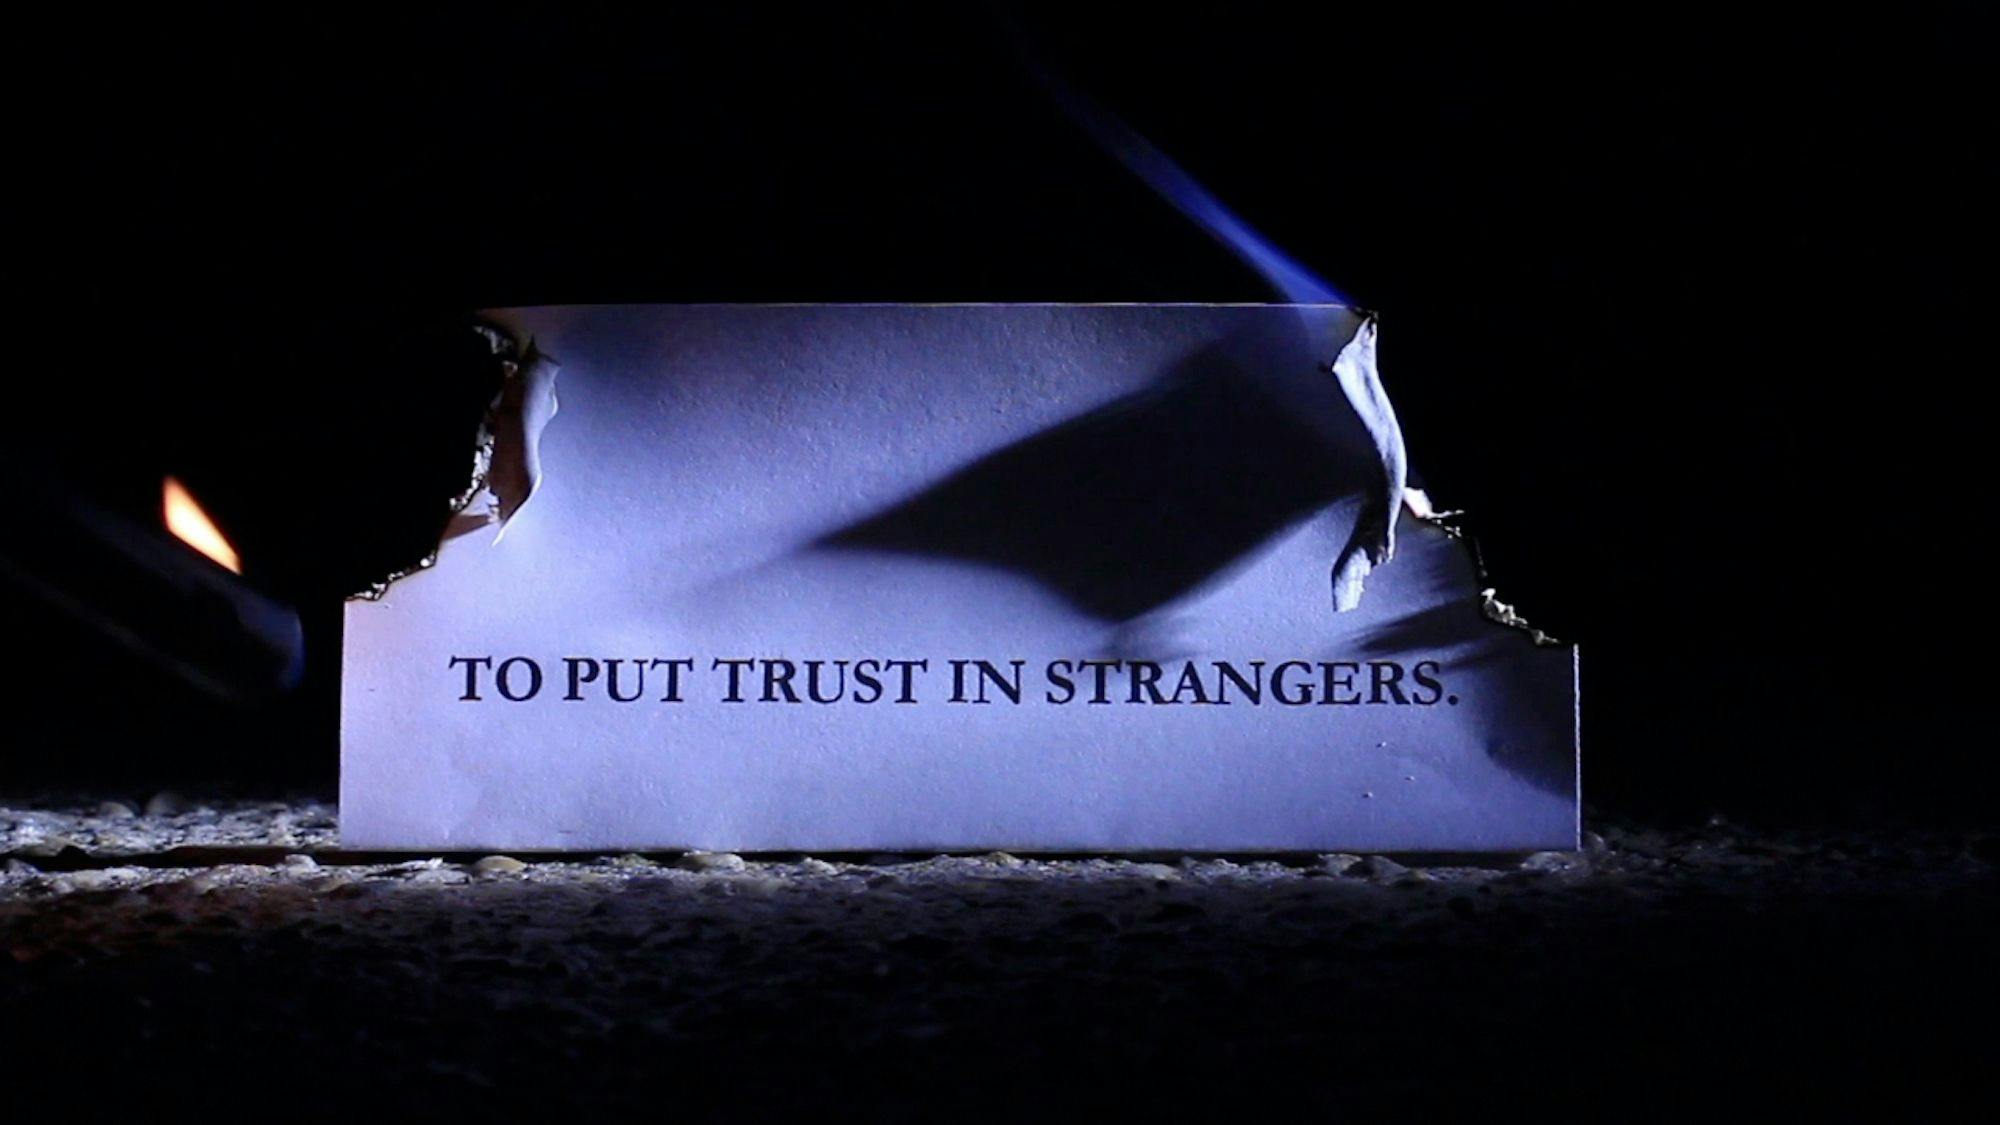 A piece of paper with the words “TO PUT TRUST IN STRANGERS” burning at the corners.  